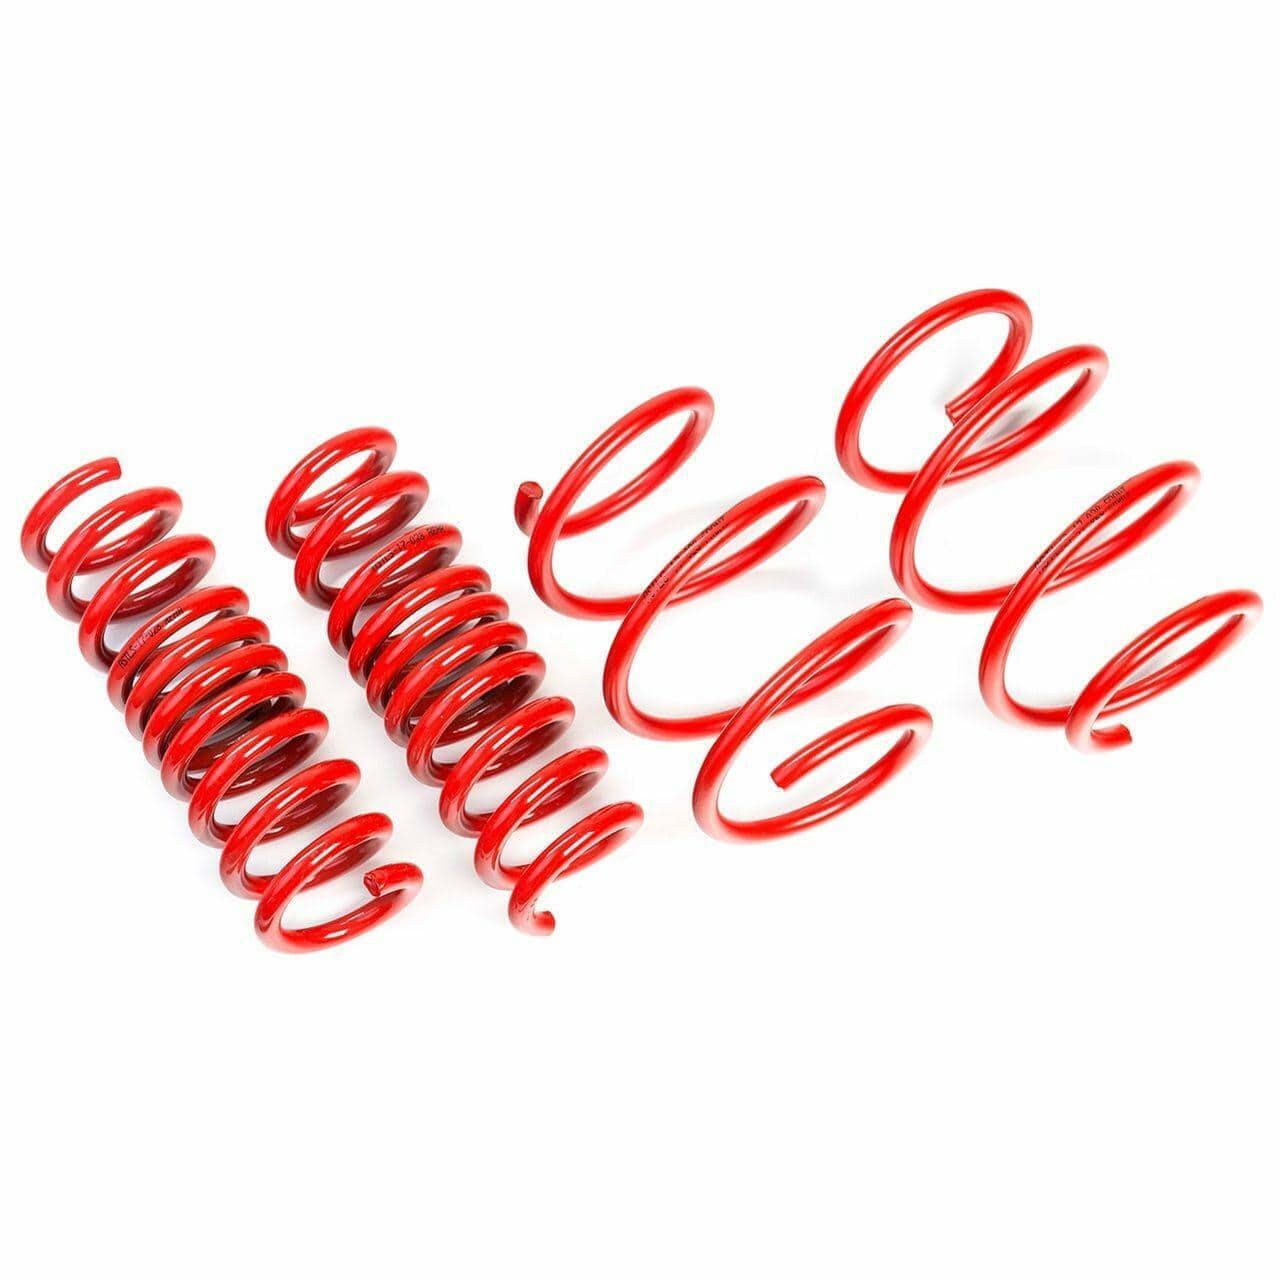 AST Suspension Lowering Springs (70MM/20MM) - 1996-1998 BMW 3 Series 320i/325i/325TD/325TDS/328i Compact/Coupe (E36) ASTLS-14-359